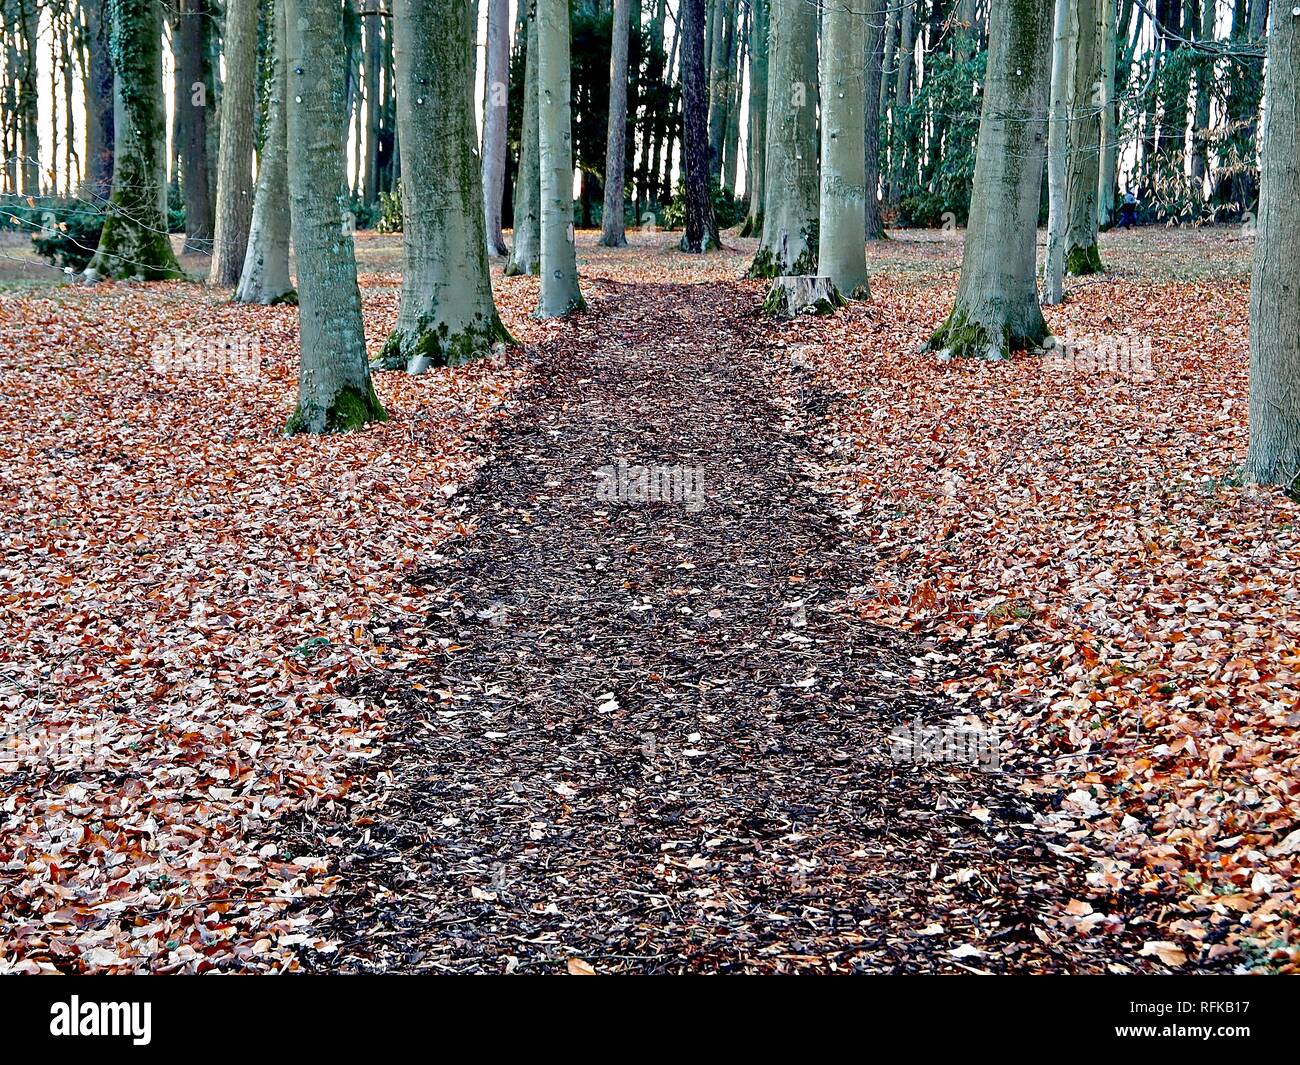 A naturl path through a forest Stock Photo